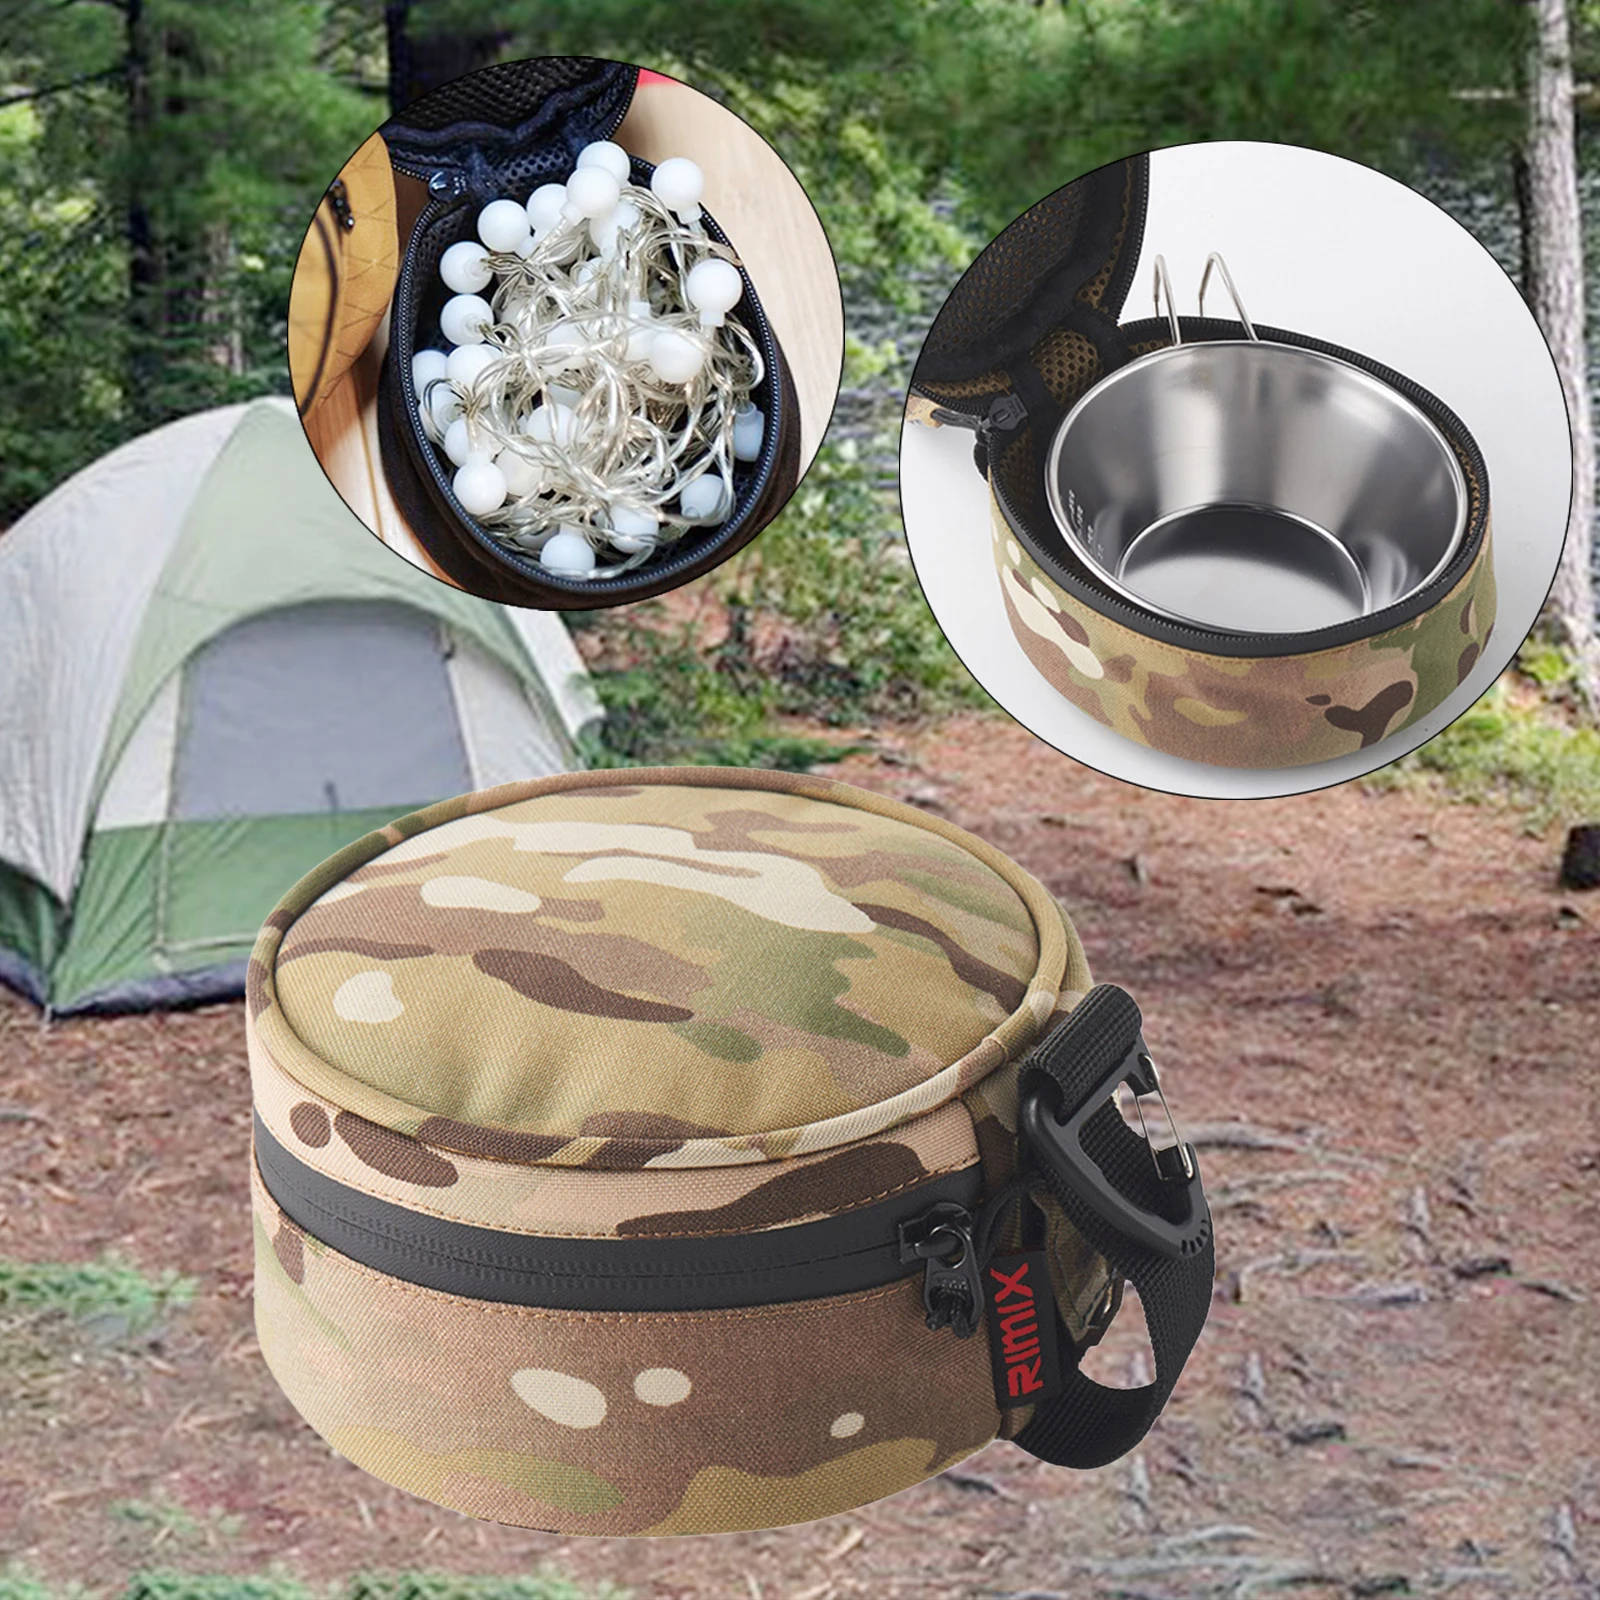 Outdoor Camping Sierra Cup Storage Bag Barbecue Tableware Portable Waterproof Container Carrying Bag for Hiking BBQ with Hooks